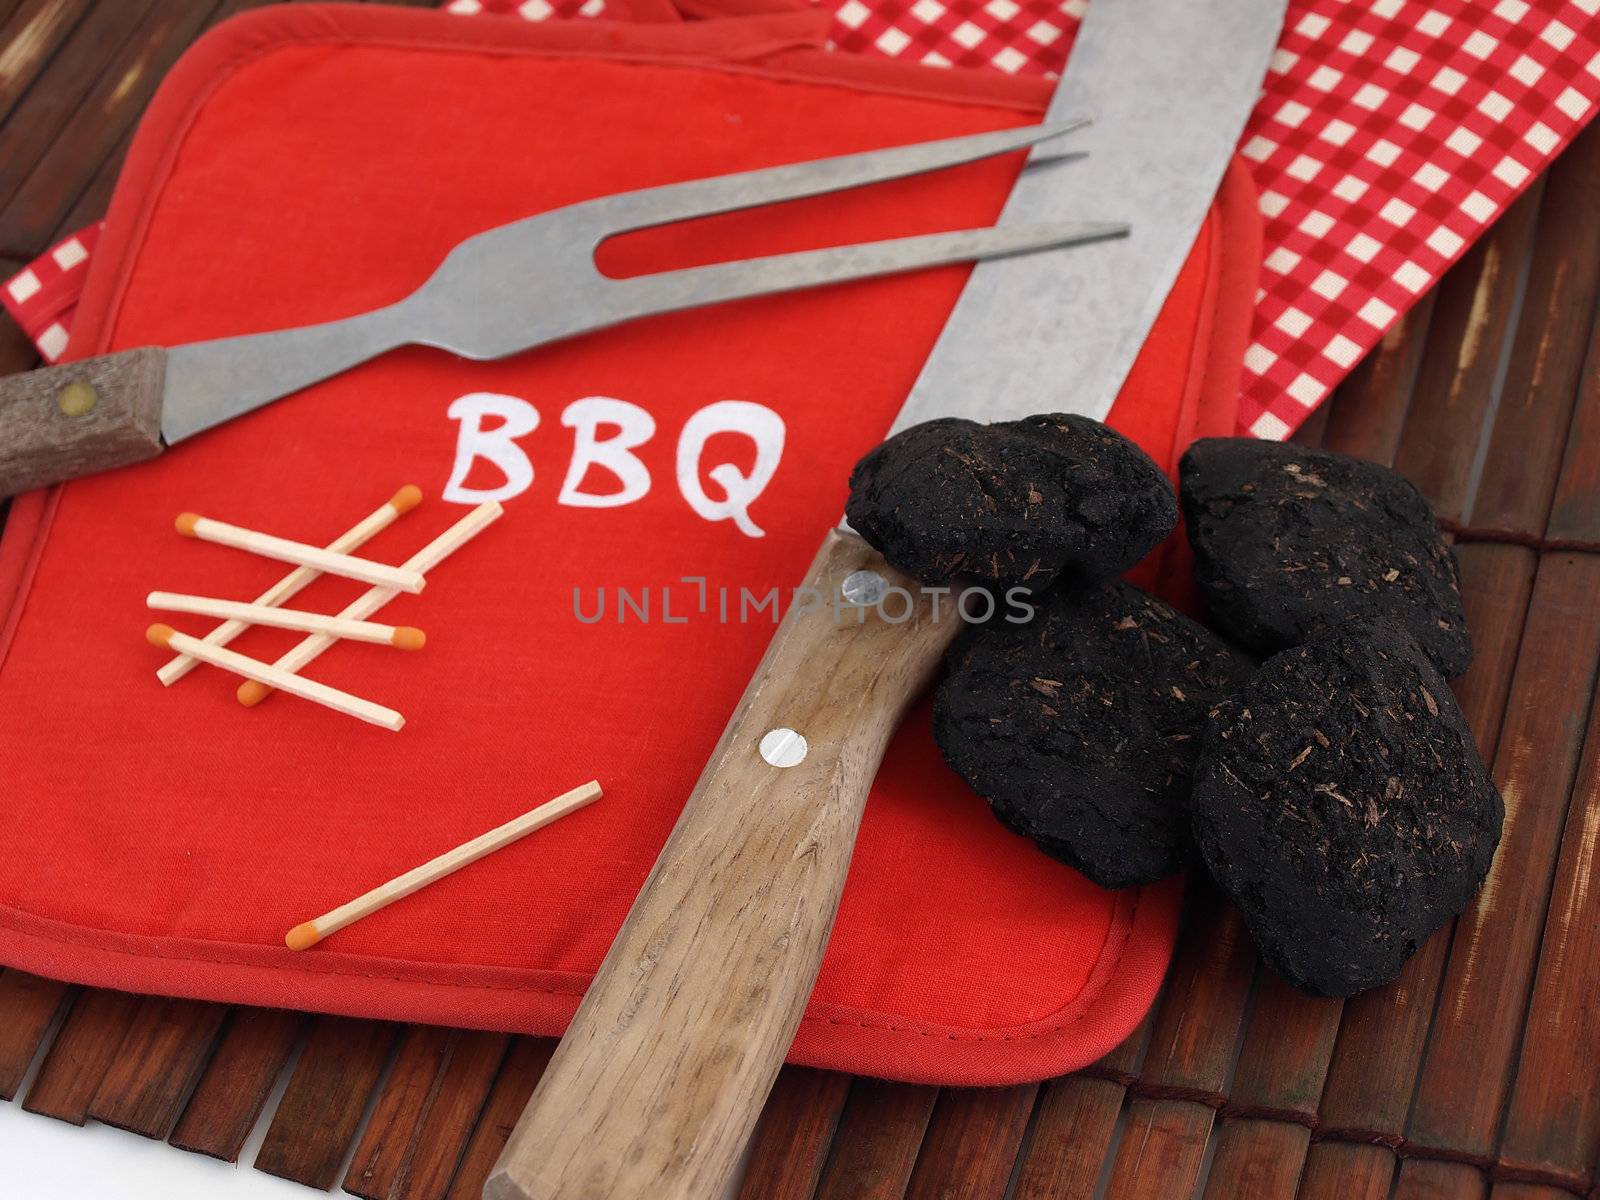 Barbecuing Utensils by RGebbiePhoto